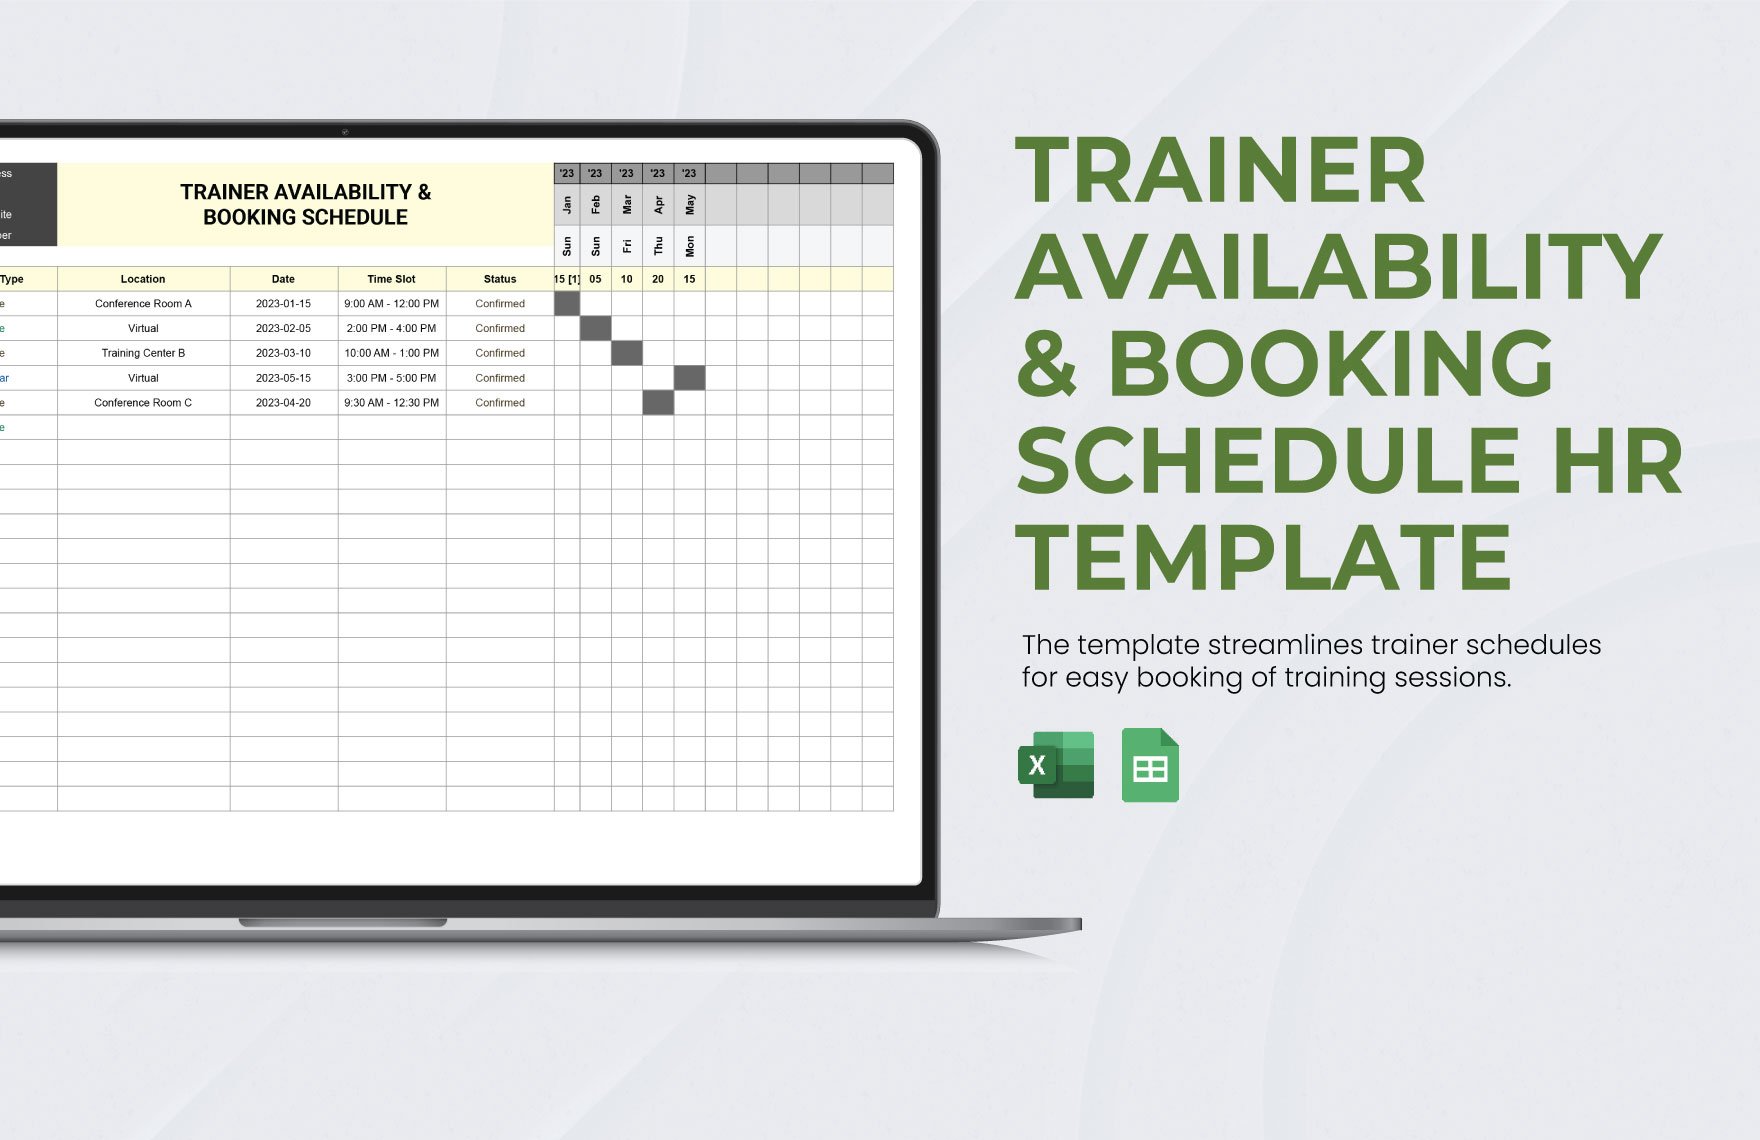 Trainer Availability & Booking Schedule HR Template in Excel, Google Sheets